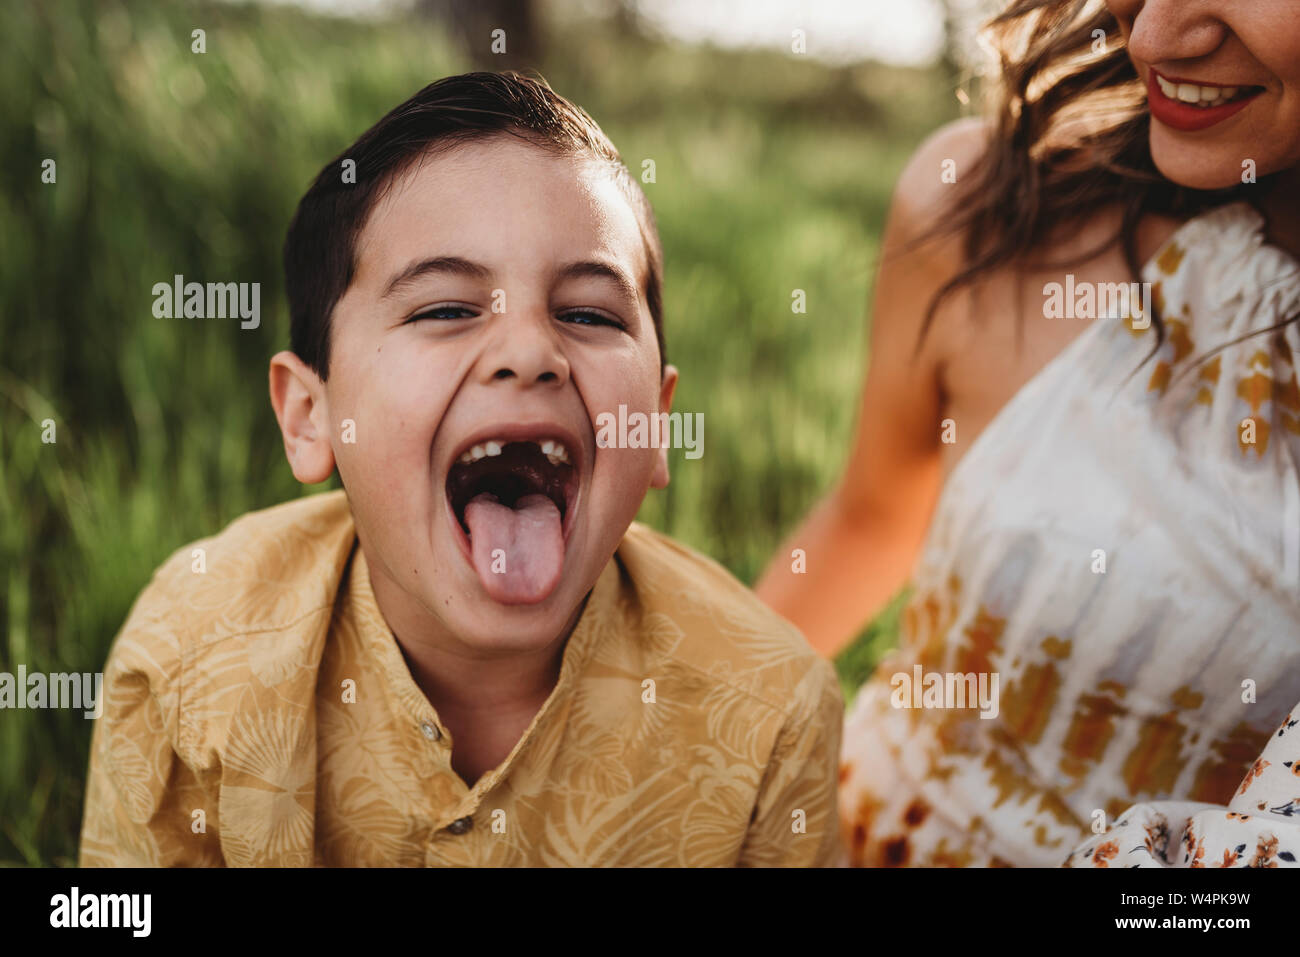 Close up portrait of young boy sticking his tongue out Stock Photo